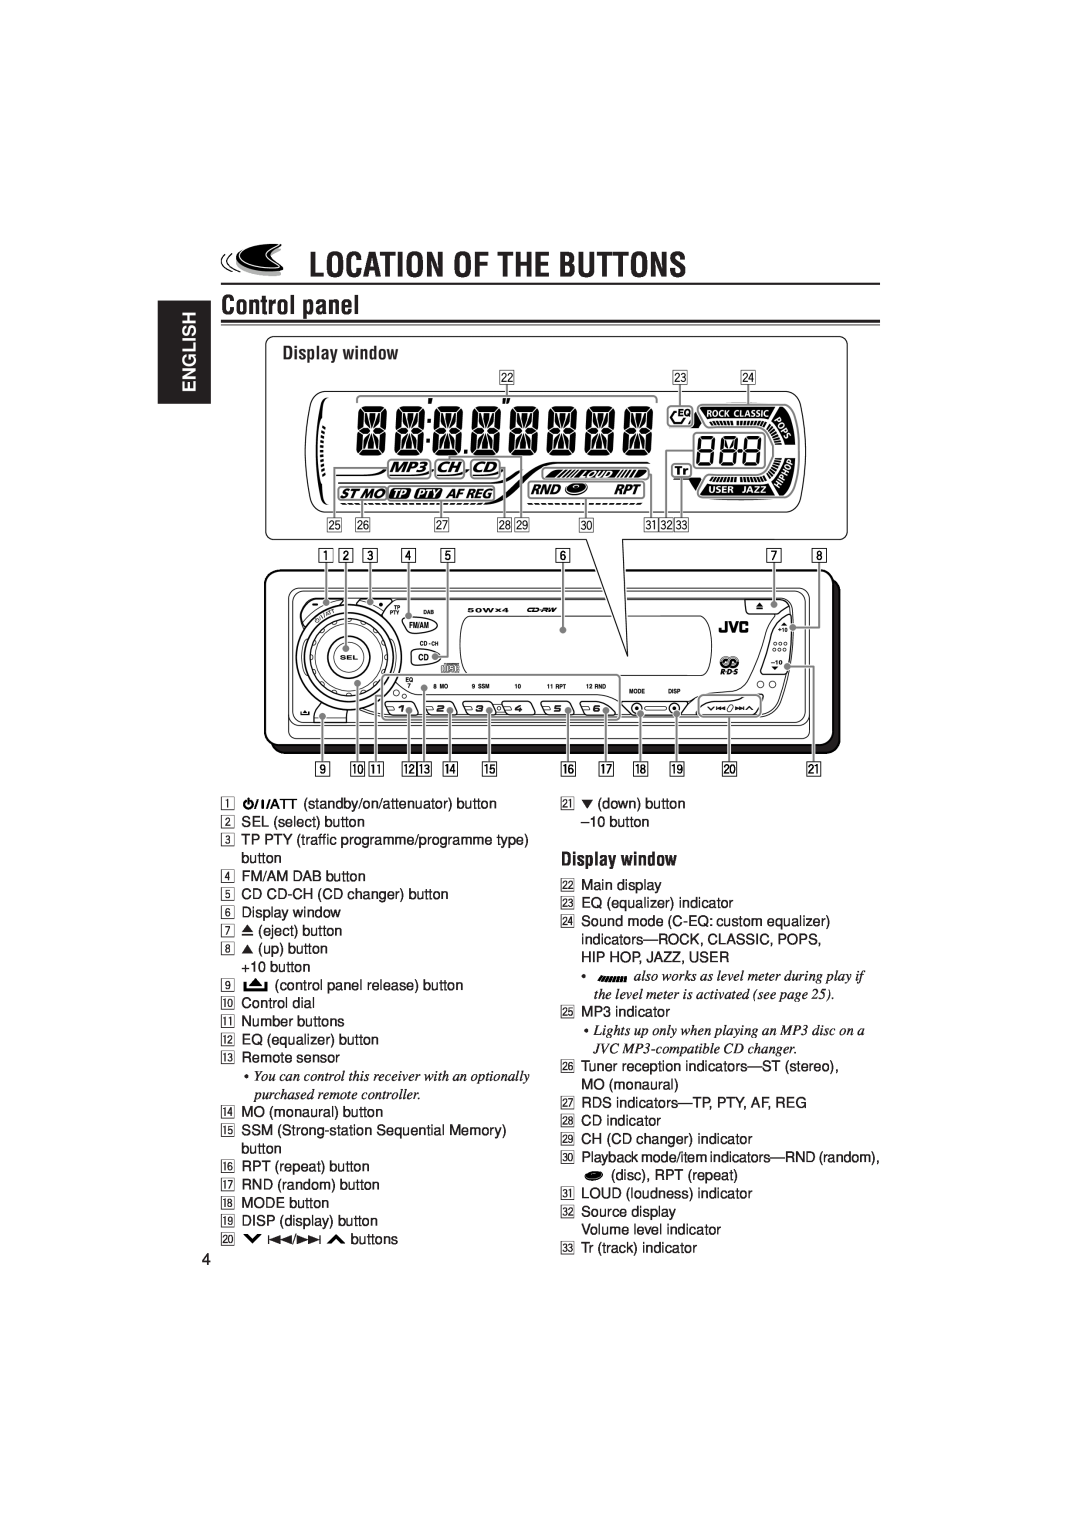 JVC KD-G301, KD-G302 manual Location Of The Buttons, Control panel, Display window, English 